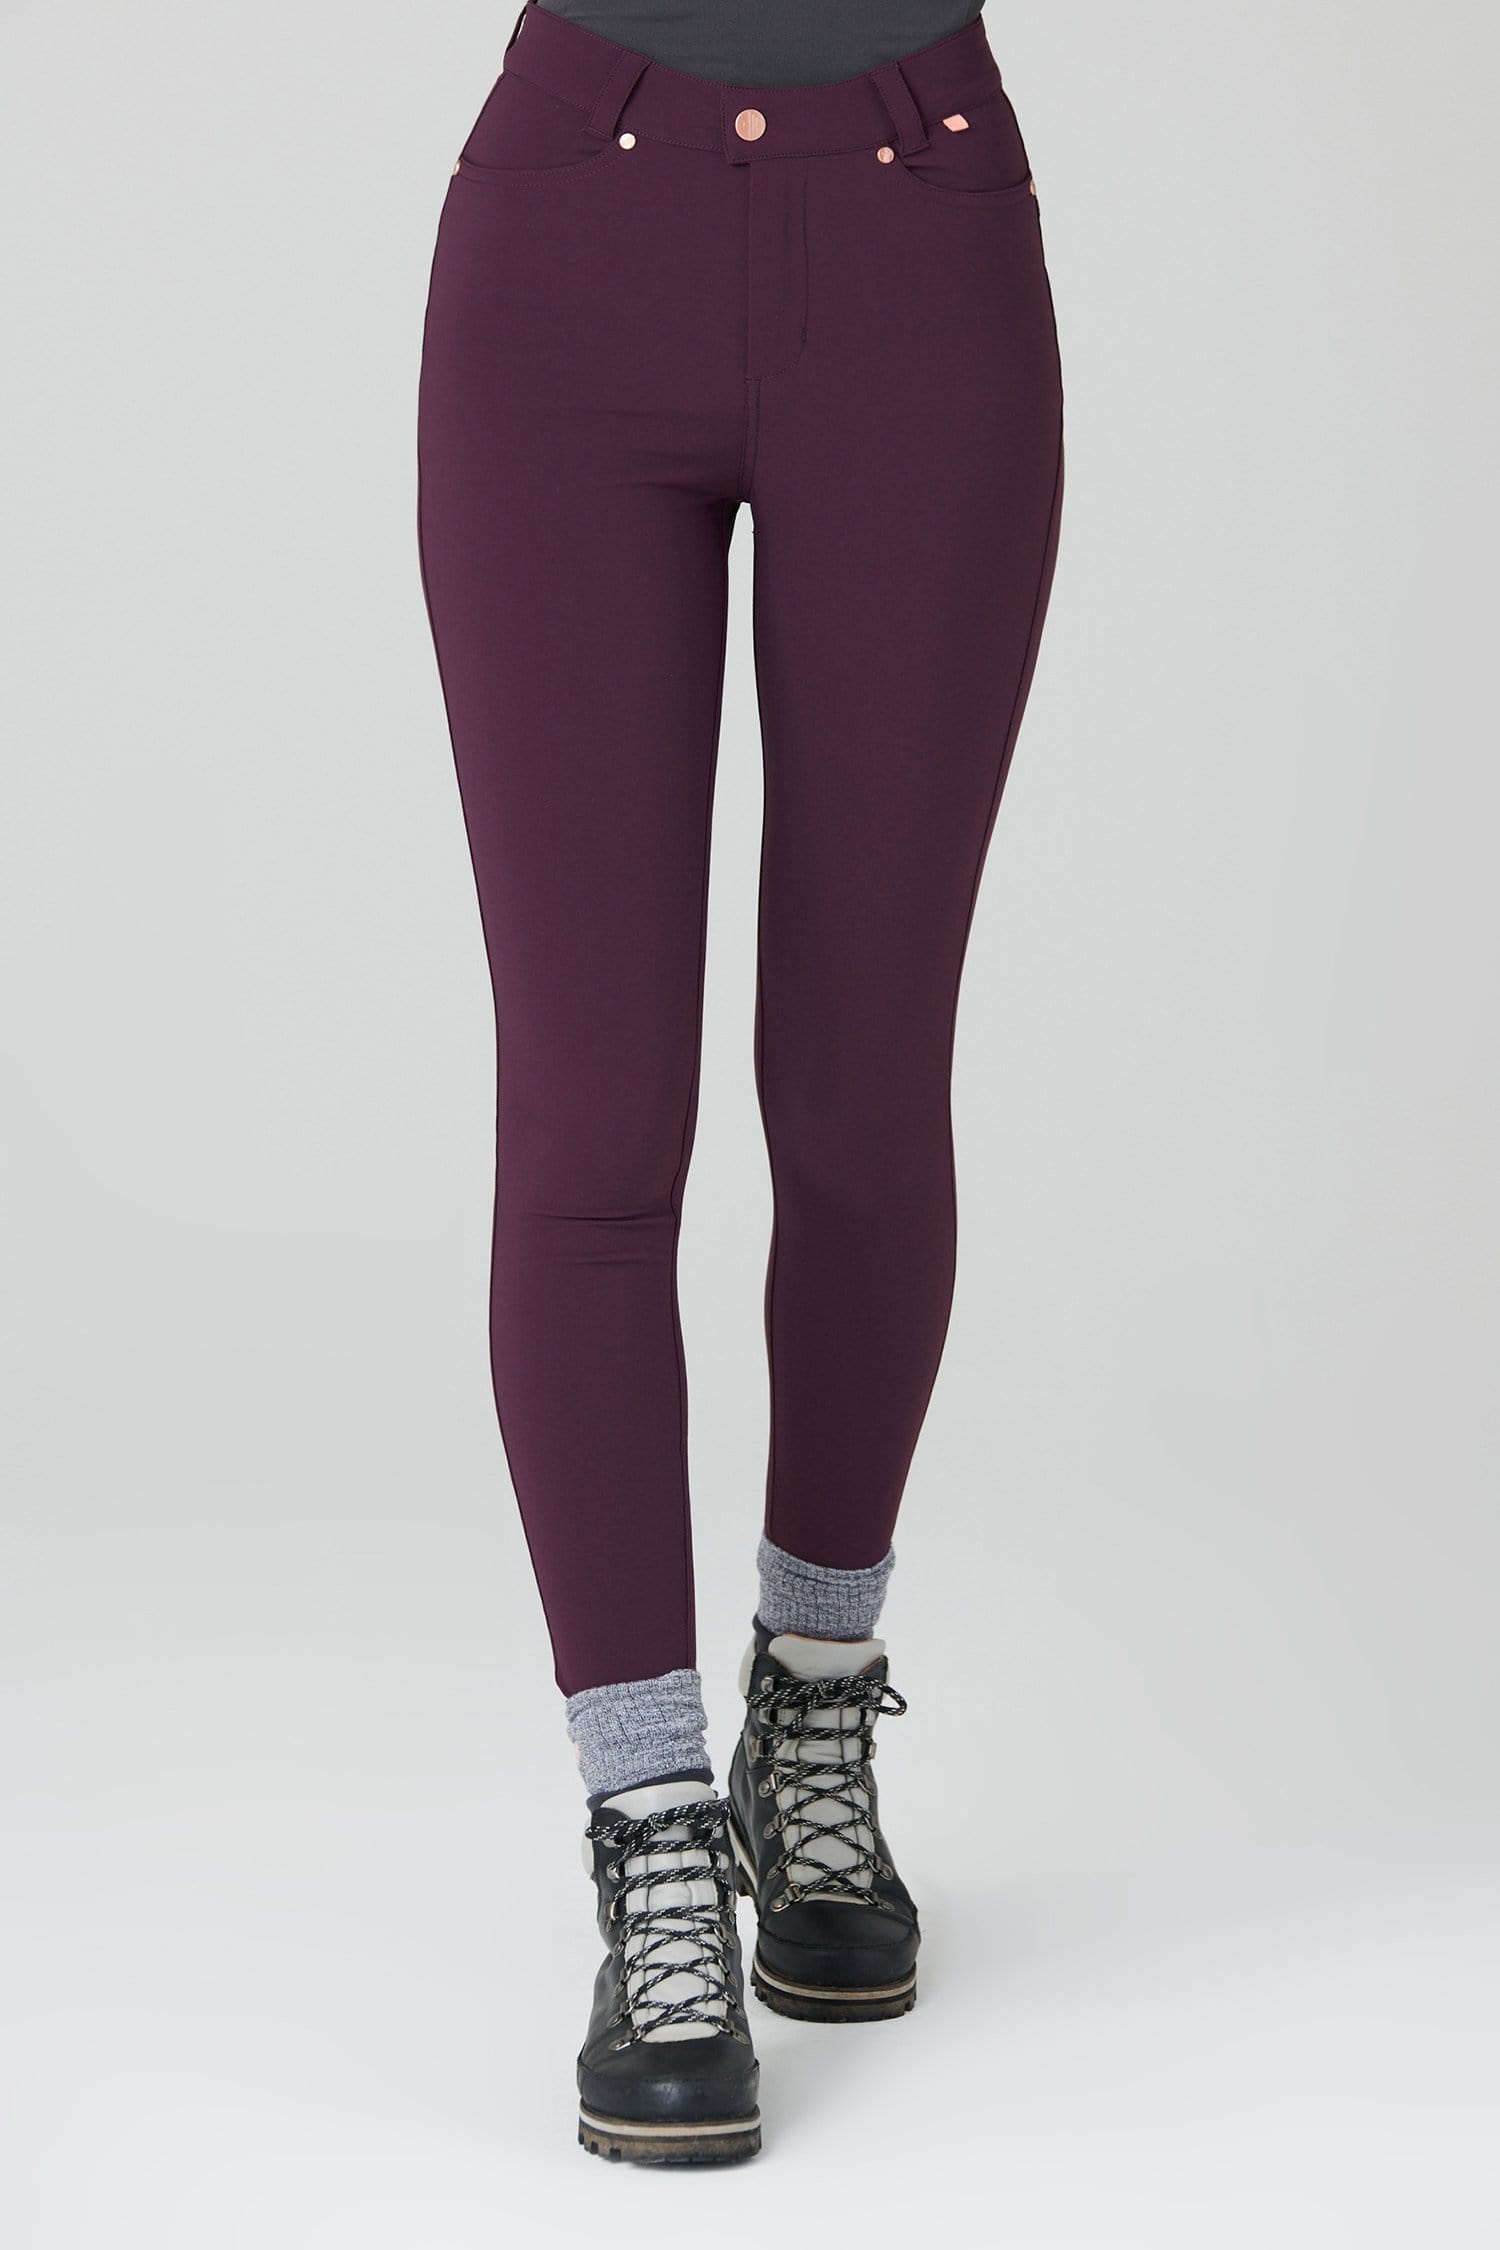 Max Stretch Skinny Outdoor Trousers - Aubergine - 32l / Uk14 - Womens - Acai Outdoorwear